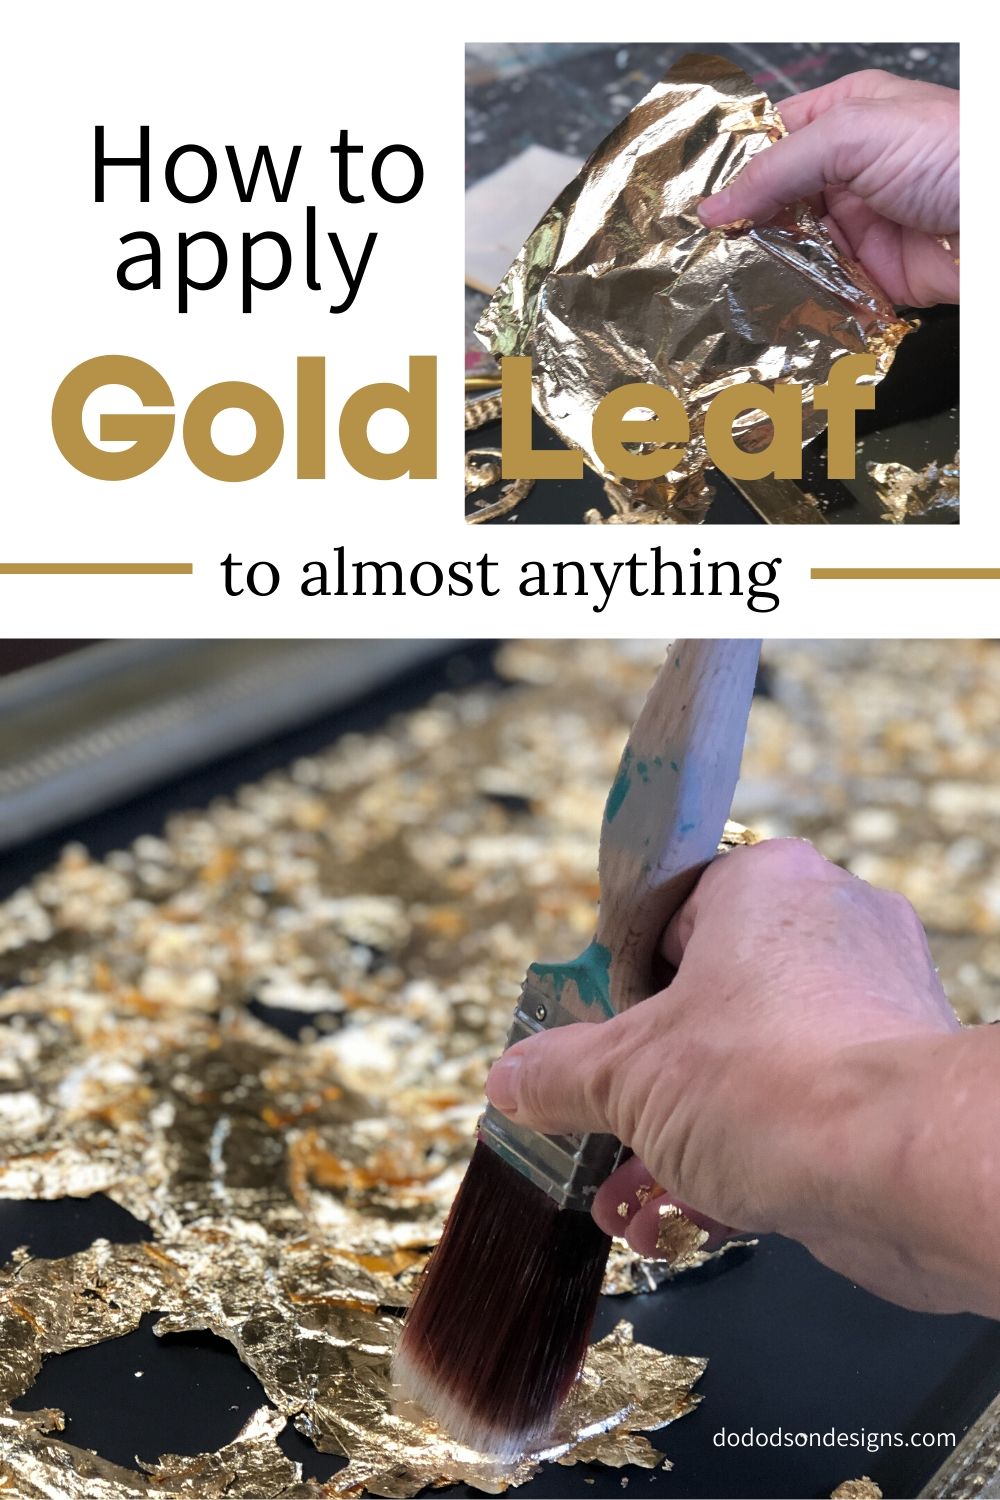 How To Apply Gold Leaf To Almost Anything! - Do Dodson Designs